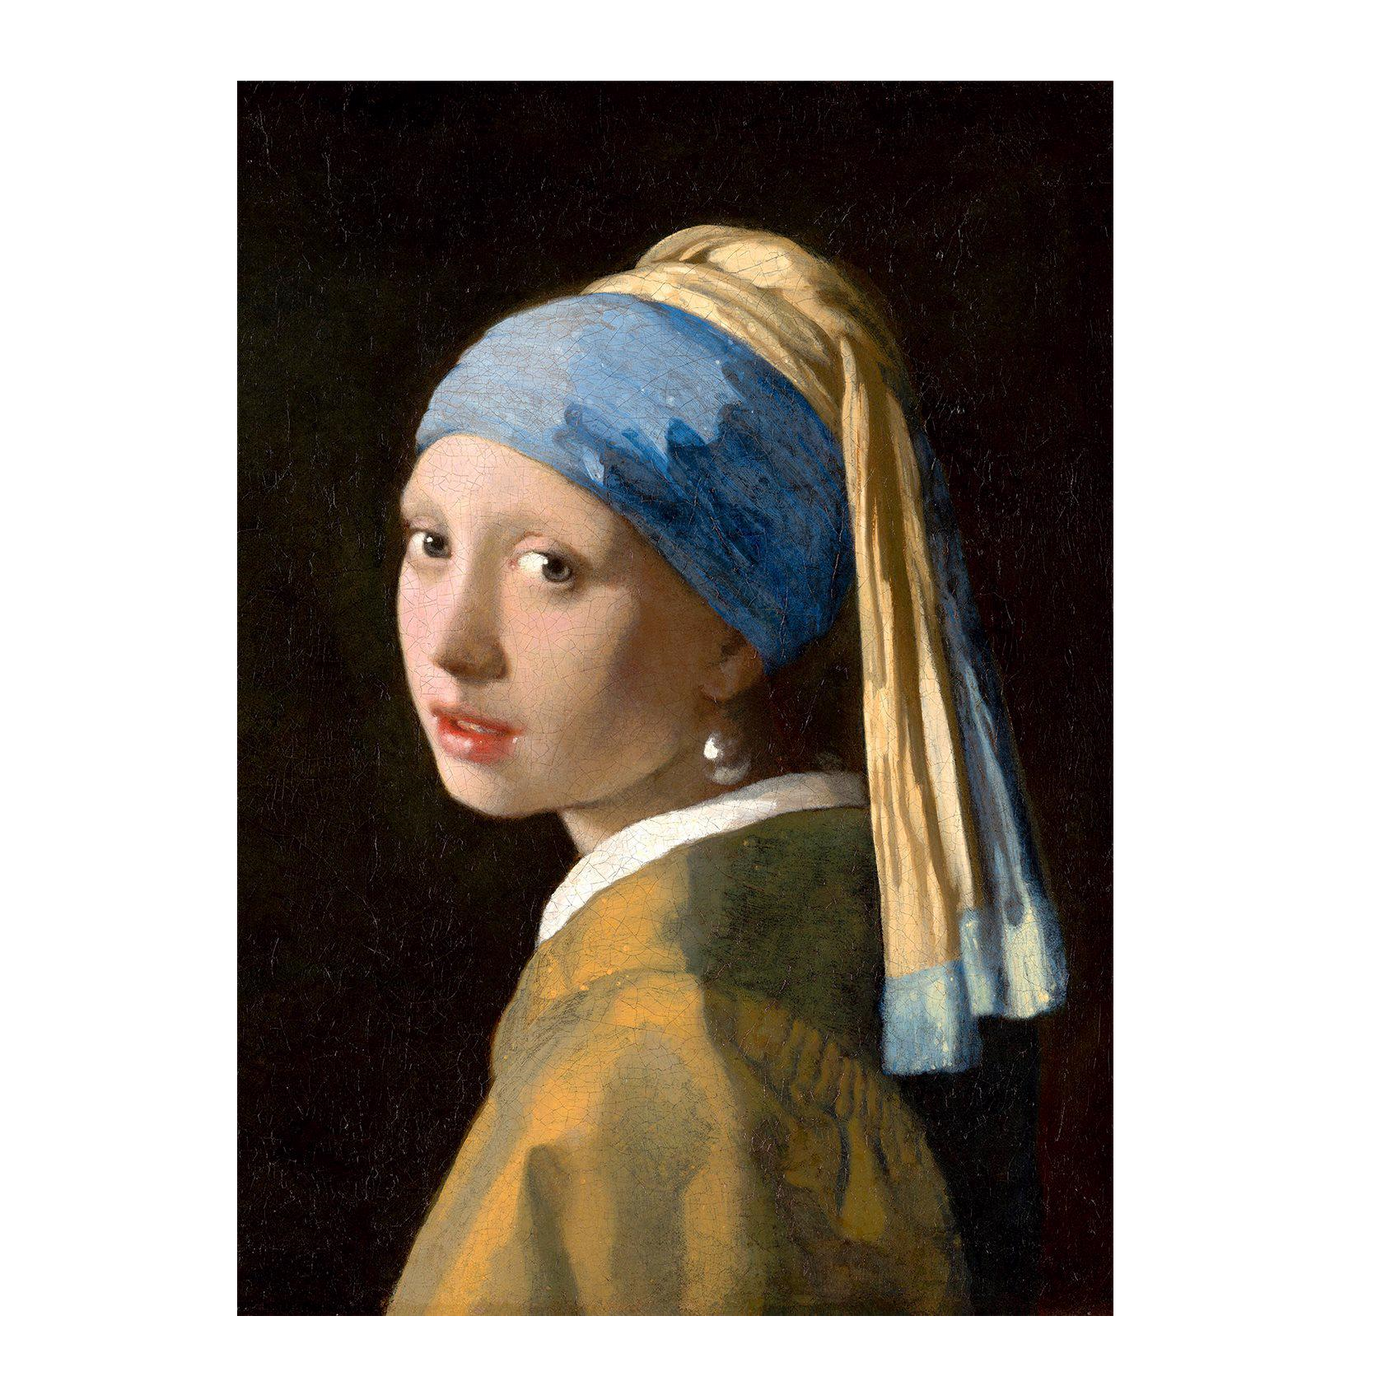 Vemeer: Girl With a Pearl Ear Ring